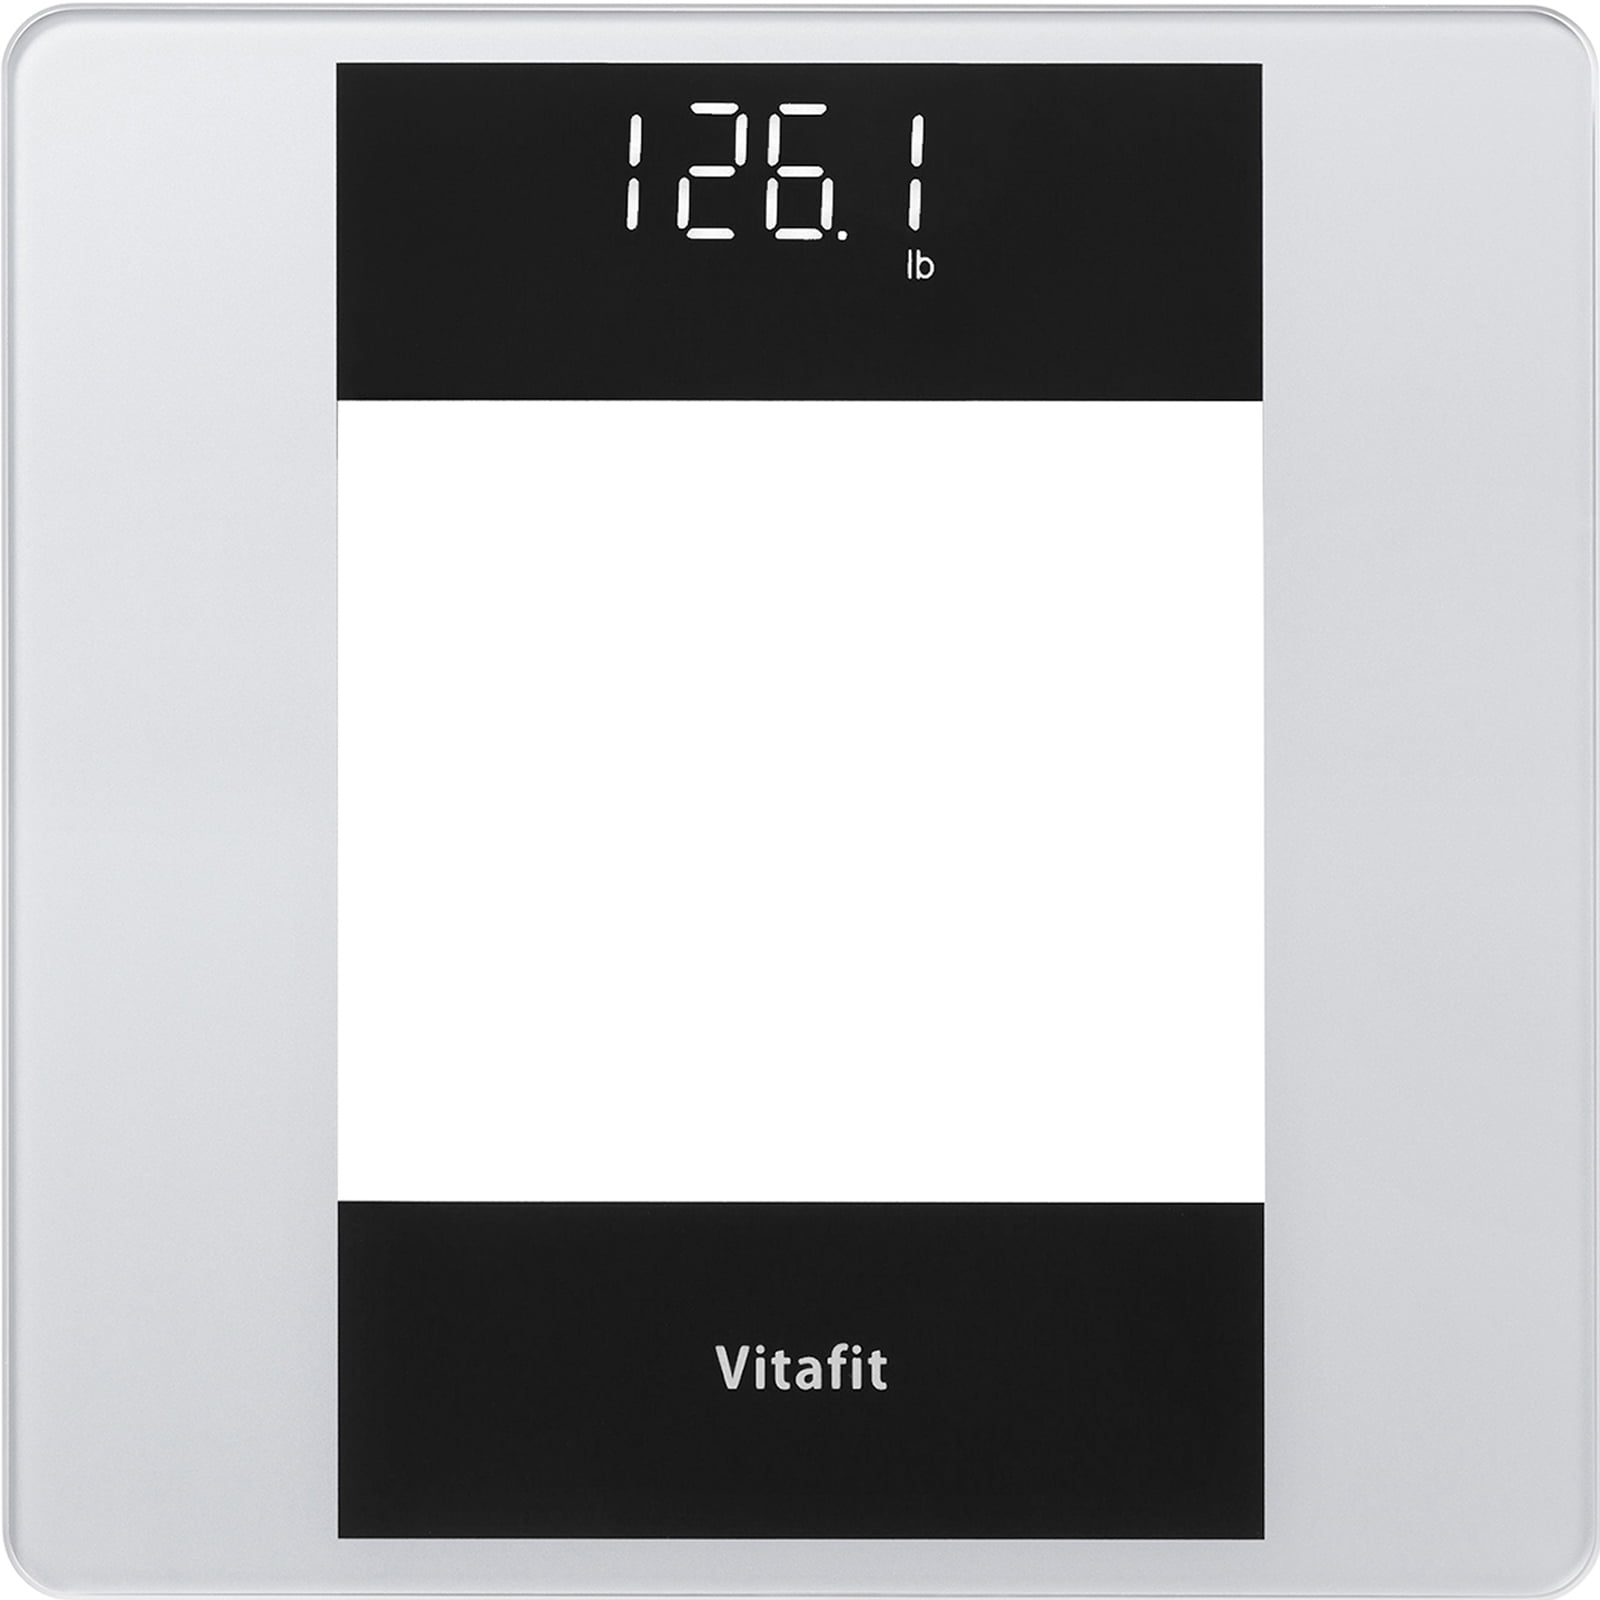 Vitafit Smart Body Fat Weight Scale for Body Composition Monitors, Weighing  Professional Since 2001,Digital Wireless Bathroom Scale for BMI Fat Water